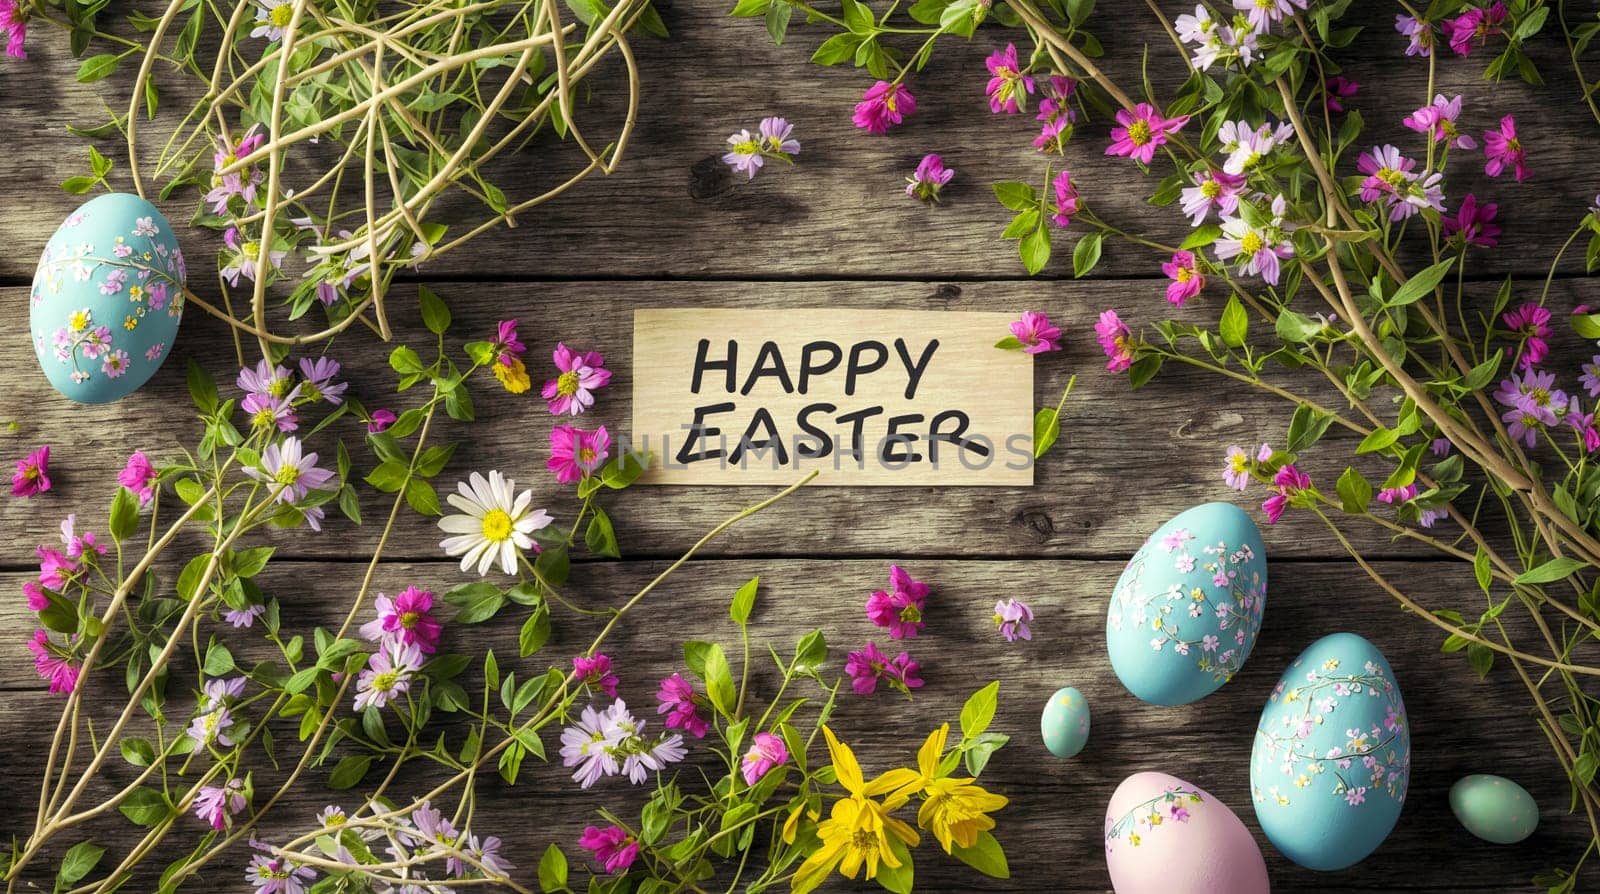 Colorful Easter eggs and spring flowers around 'Happy Easter' sign on a wooden backdrop by chrisroll